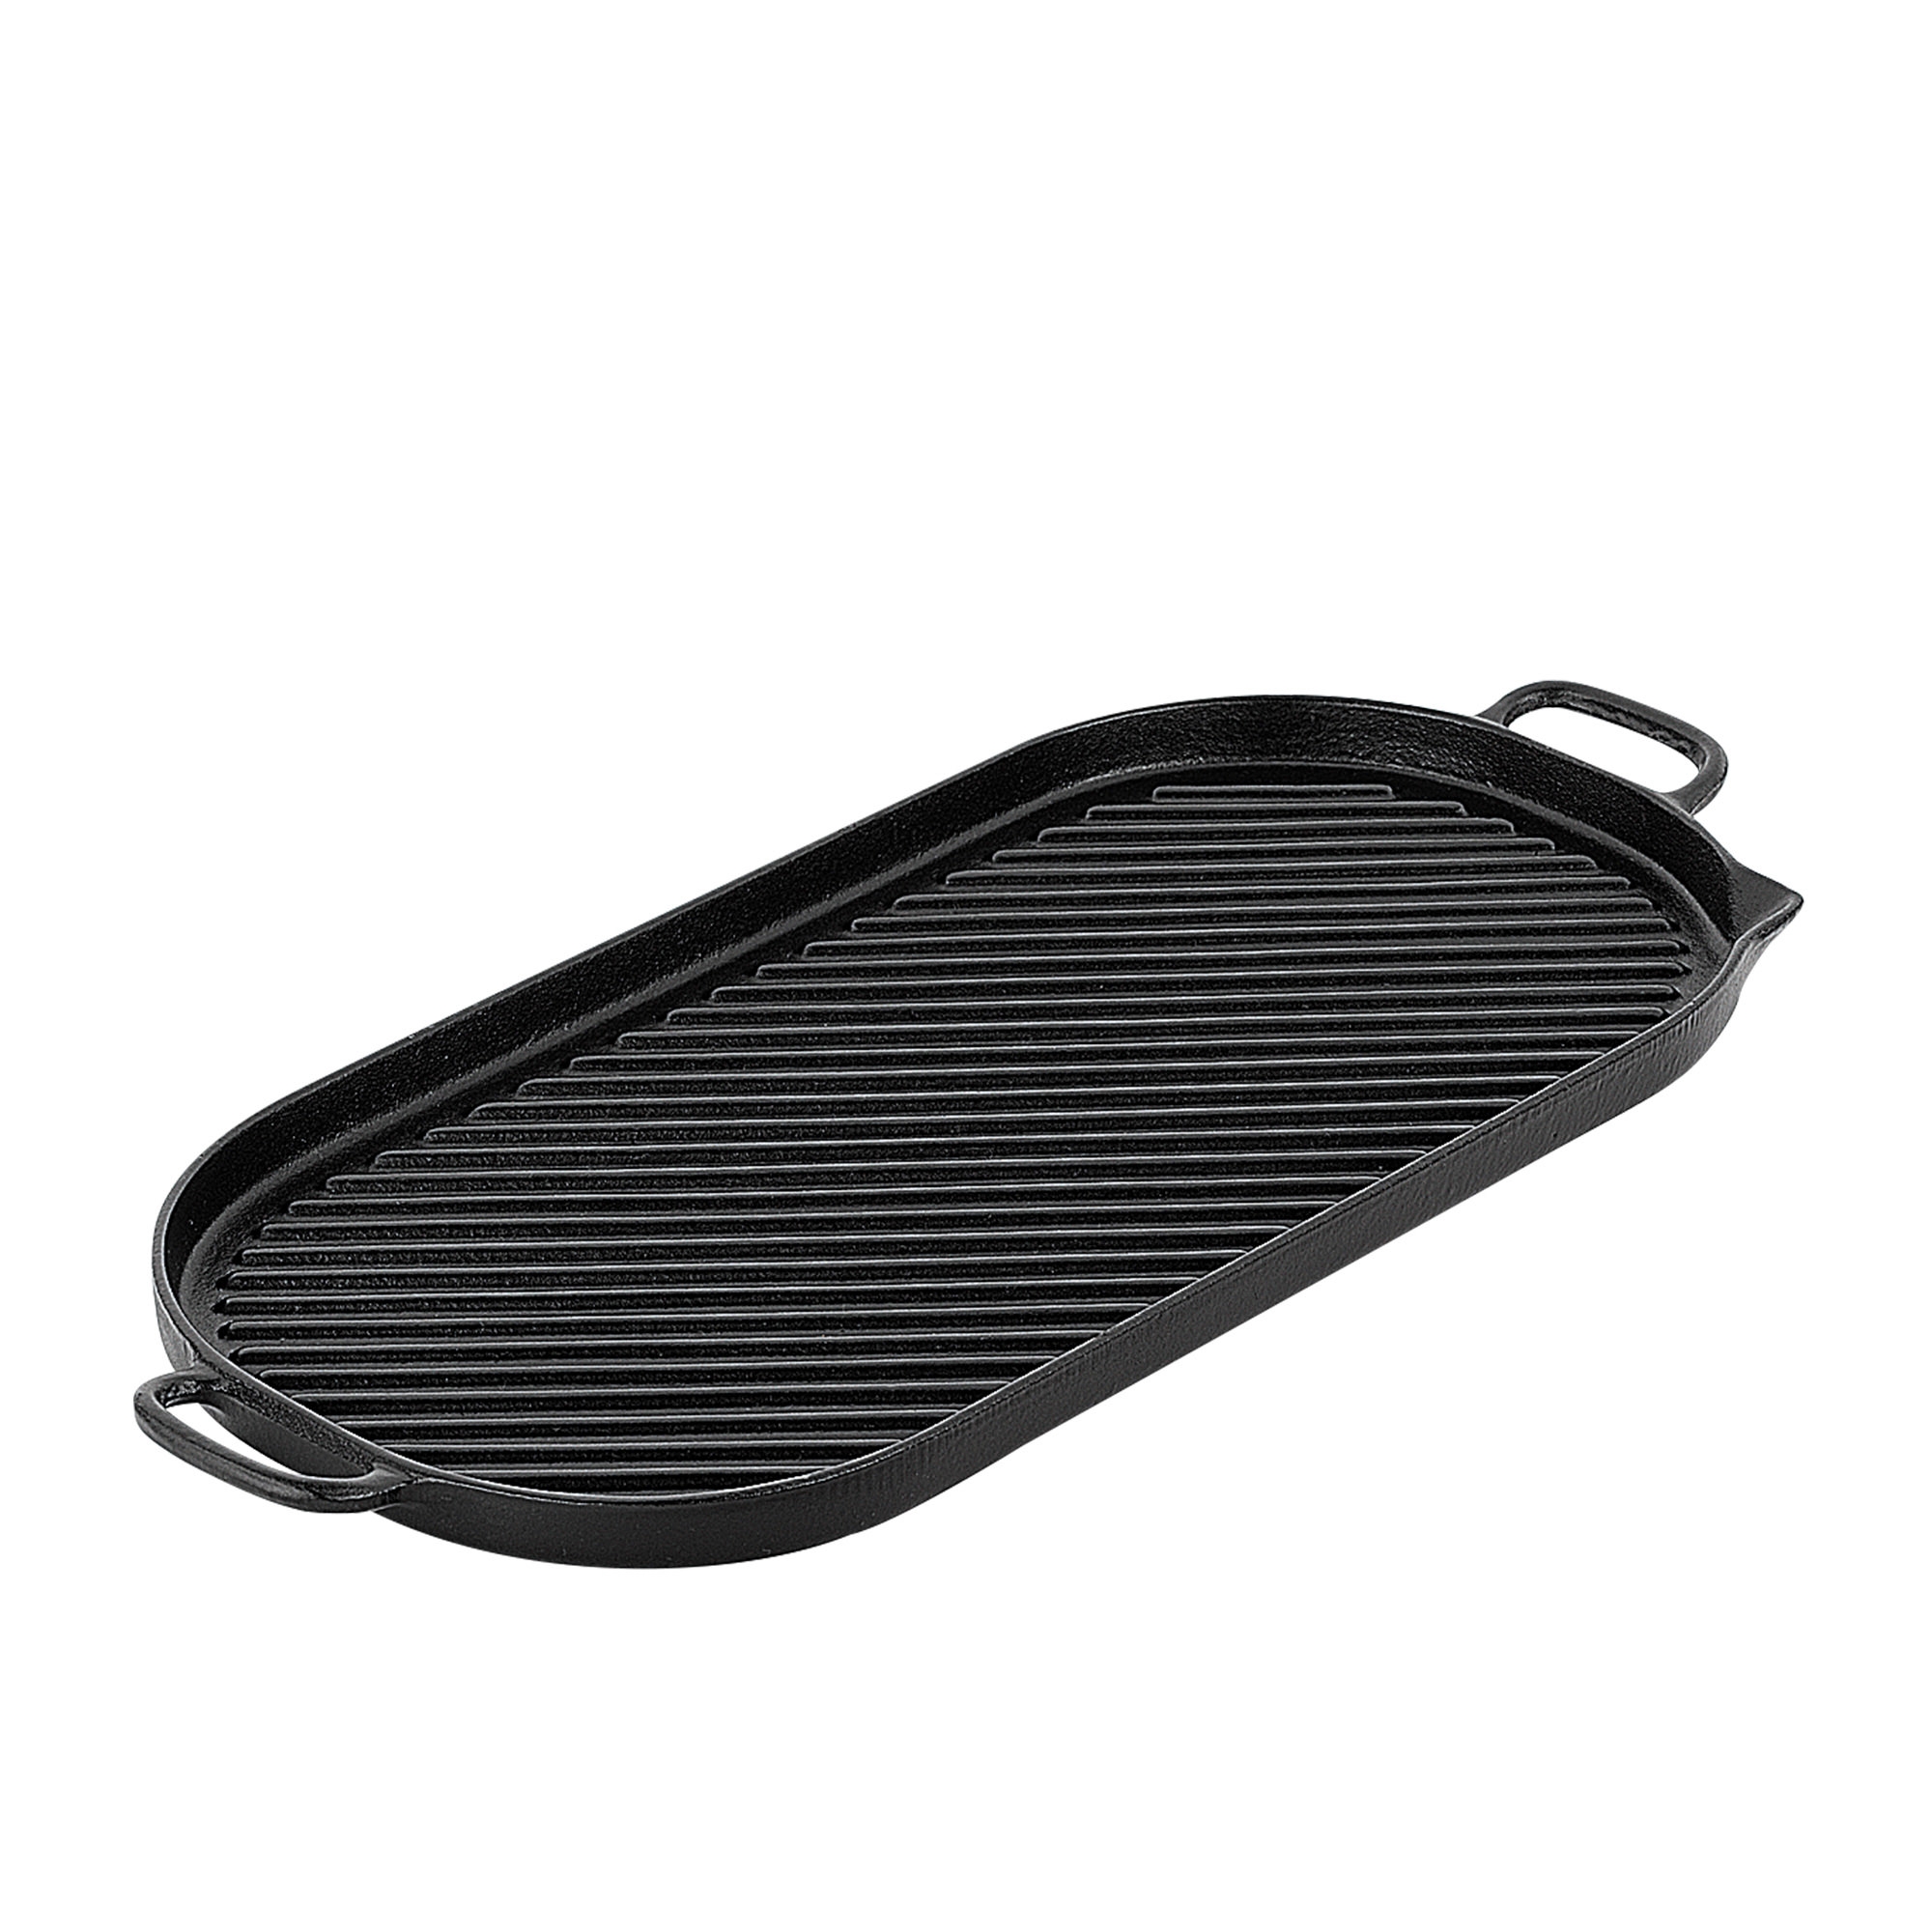 Chasseur Giant Stove Top Grill 53x23cm Image 2